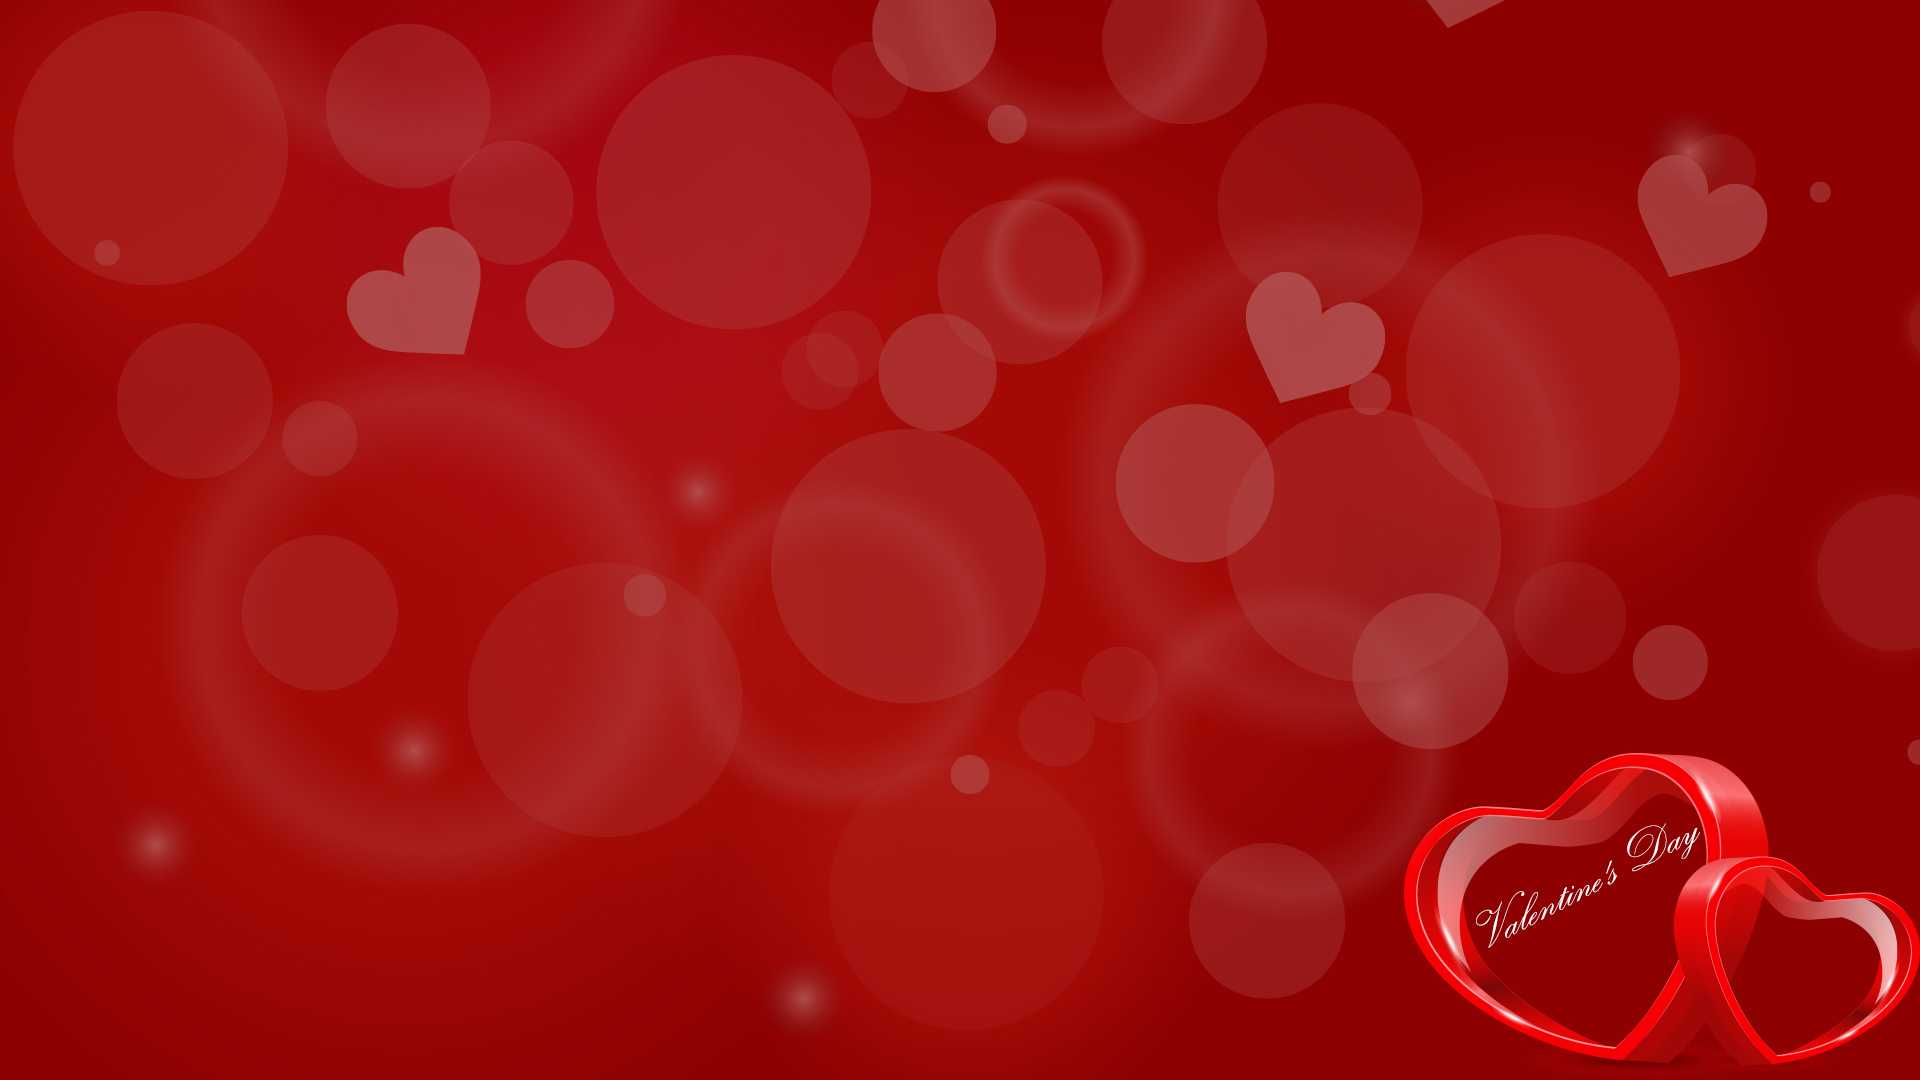 Valentines Day Heart Backgrounds For Powerpoint – Love Ppt For Valentine Powerpoint Templates Free